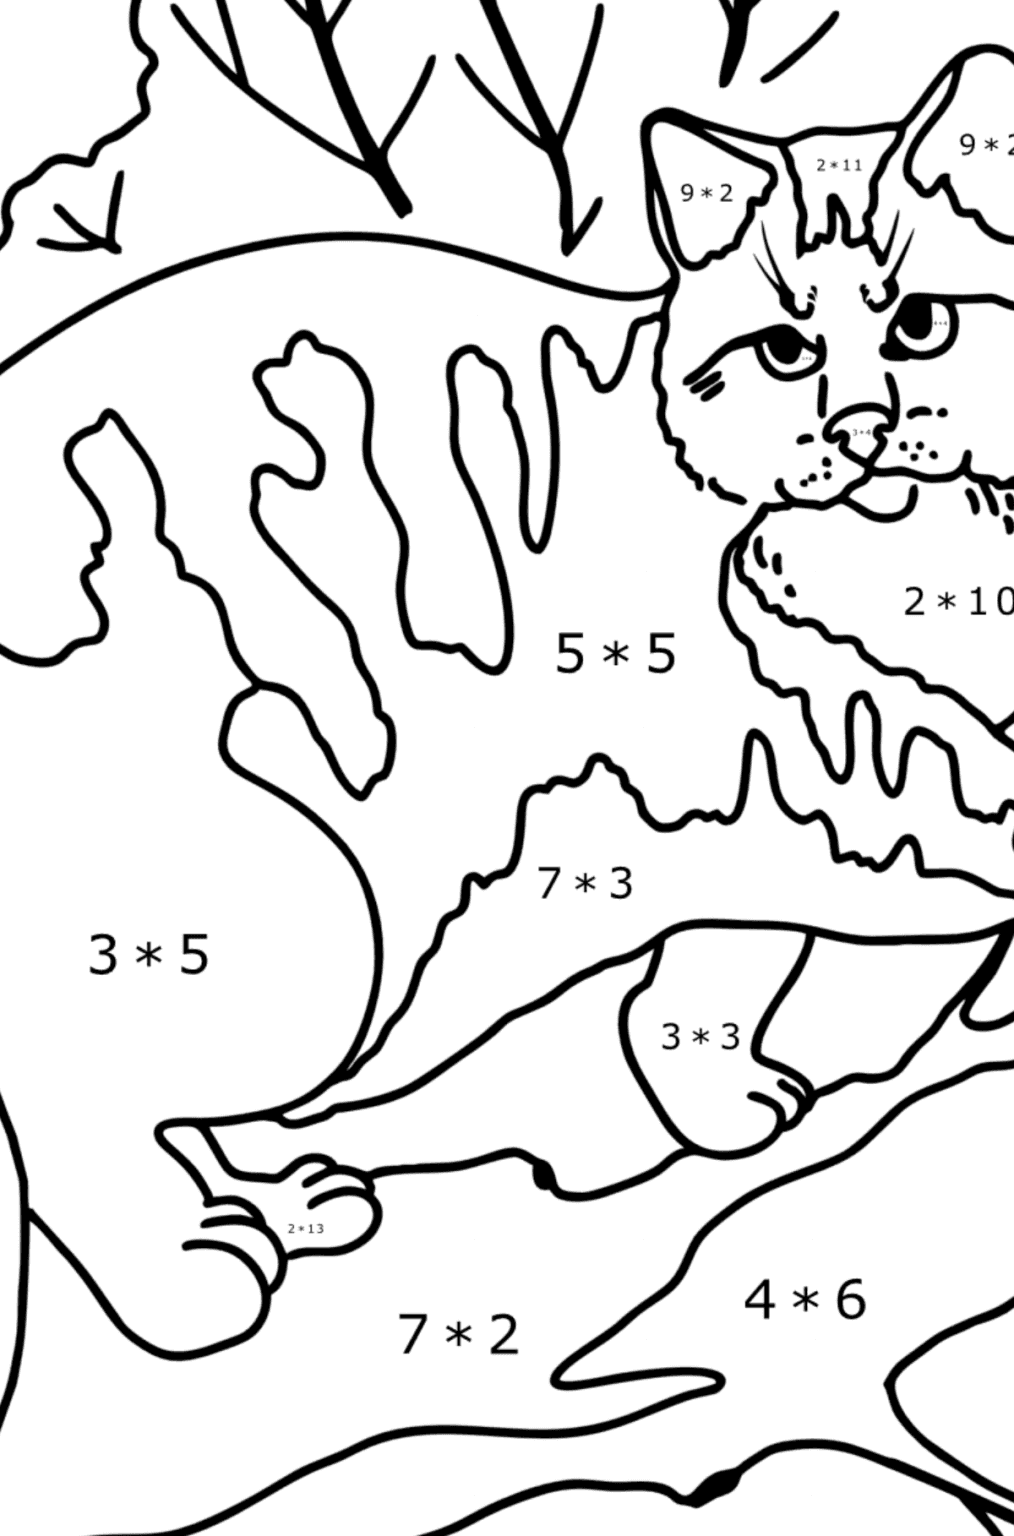 Wild Forest Cat coloring page ♥ Online and Print for Free!